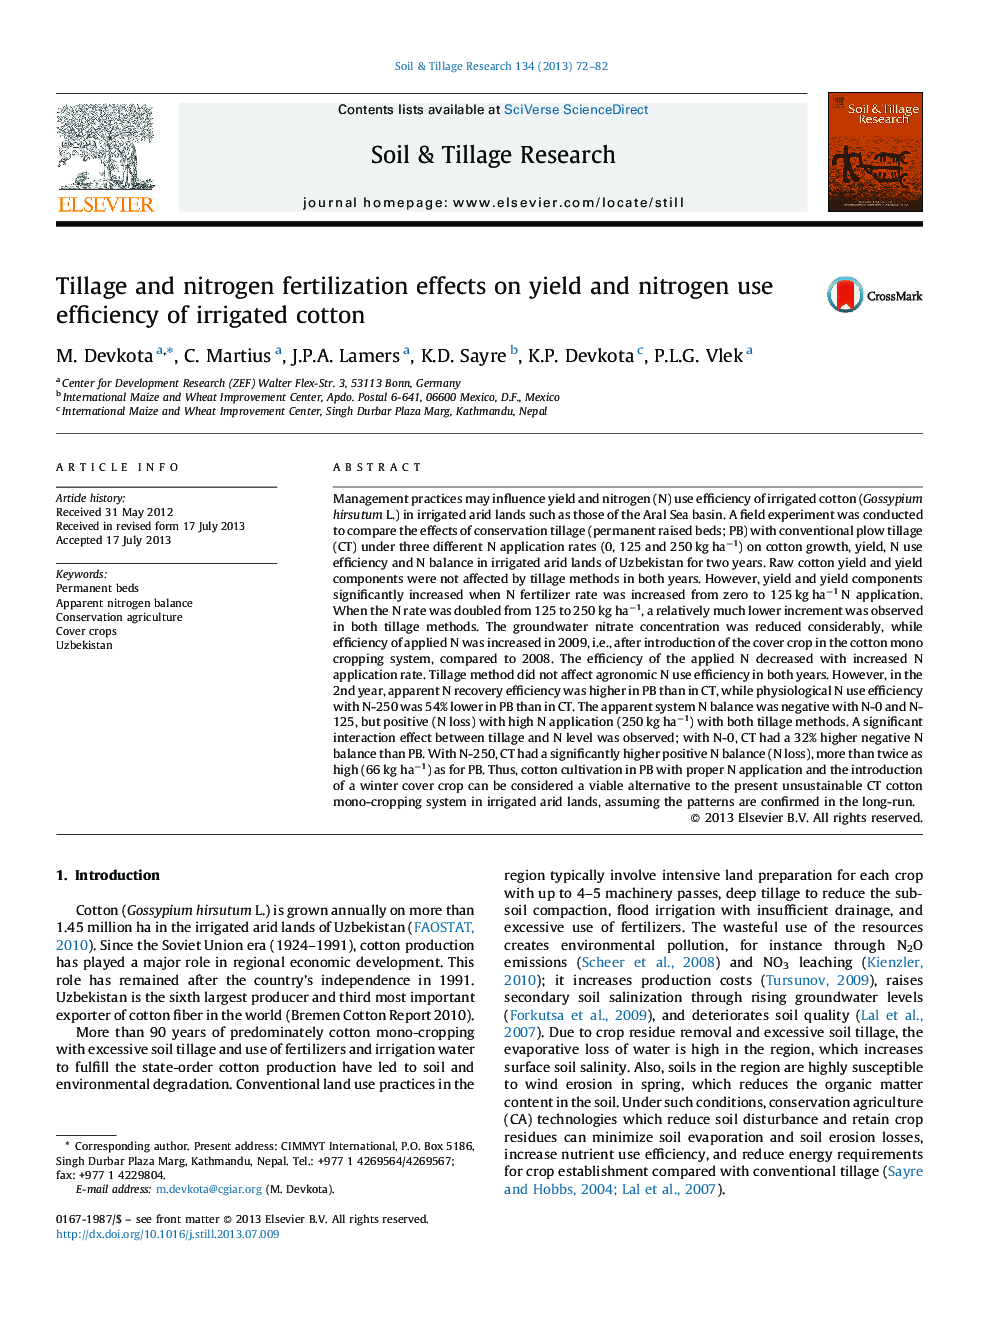 Tillage and nitrogen fertilization effects on yield and nitrogen use efficiency of irrigated cotton